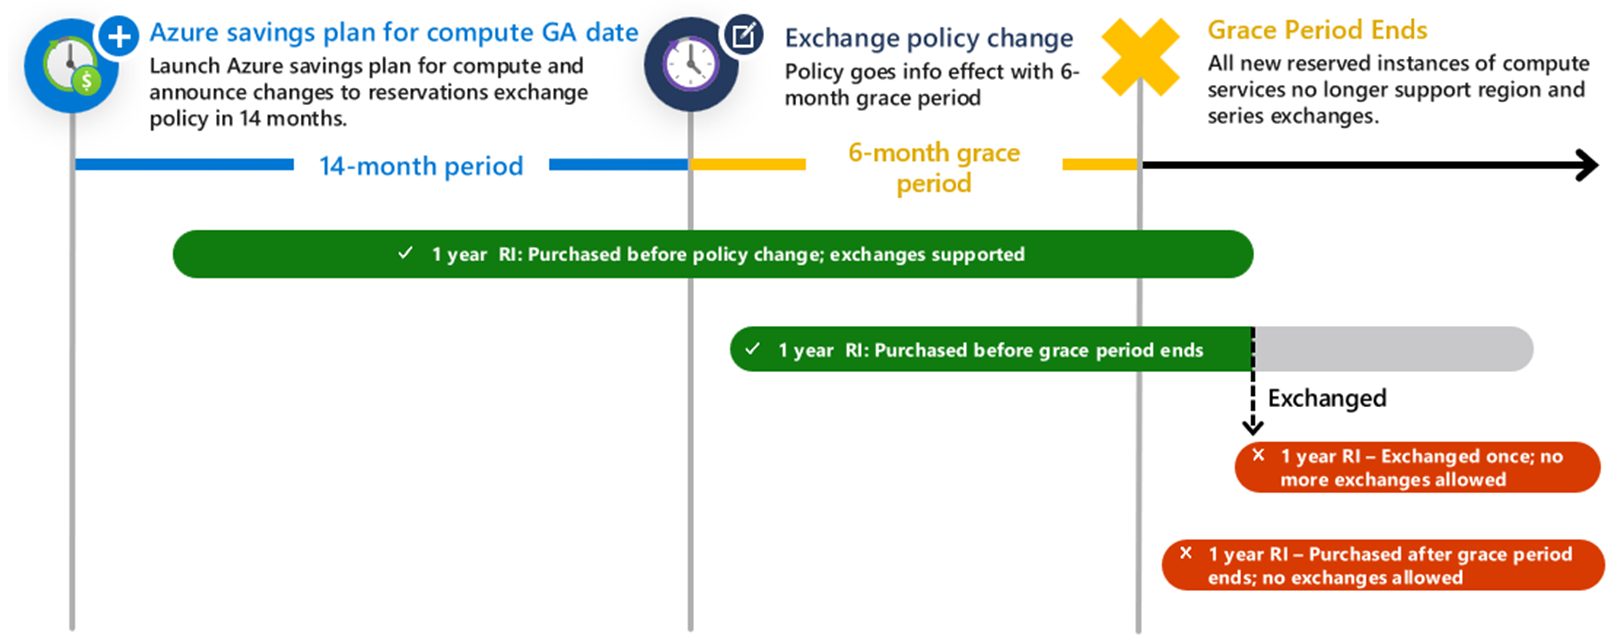 Diagram showing the exchange policy timeline.